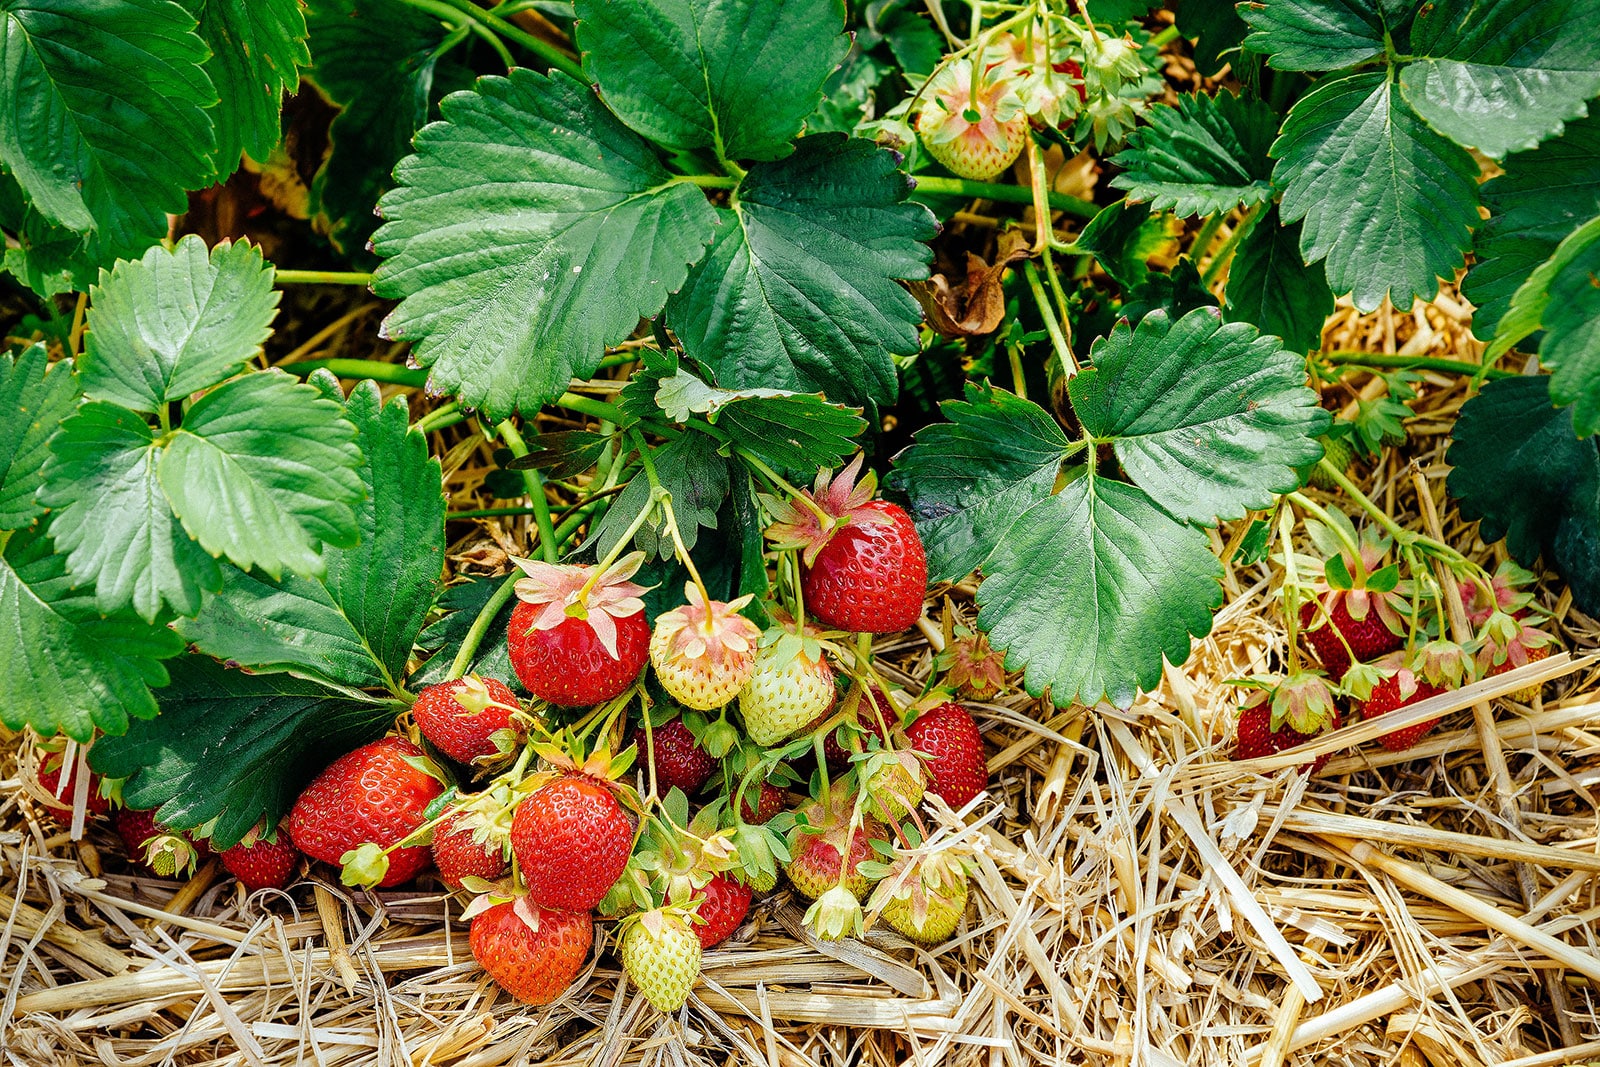 A cluster of both ripe and unripe strawberries growing on a plant in a garden bed mulched with strraw